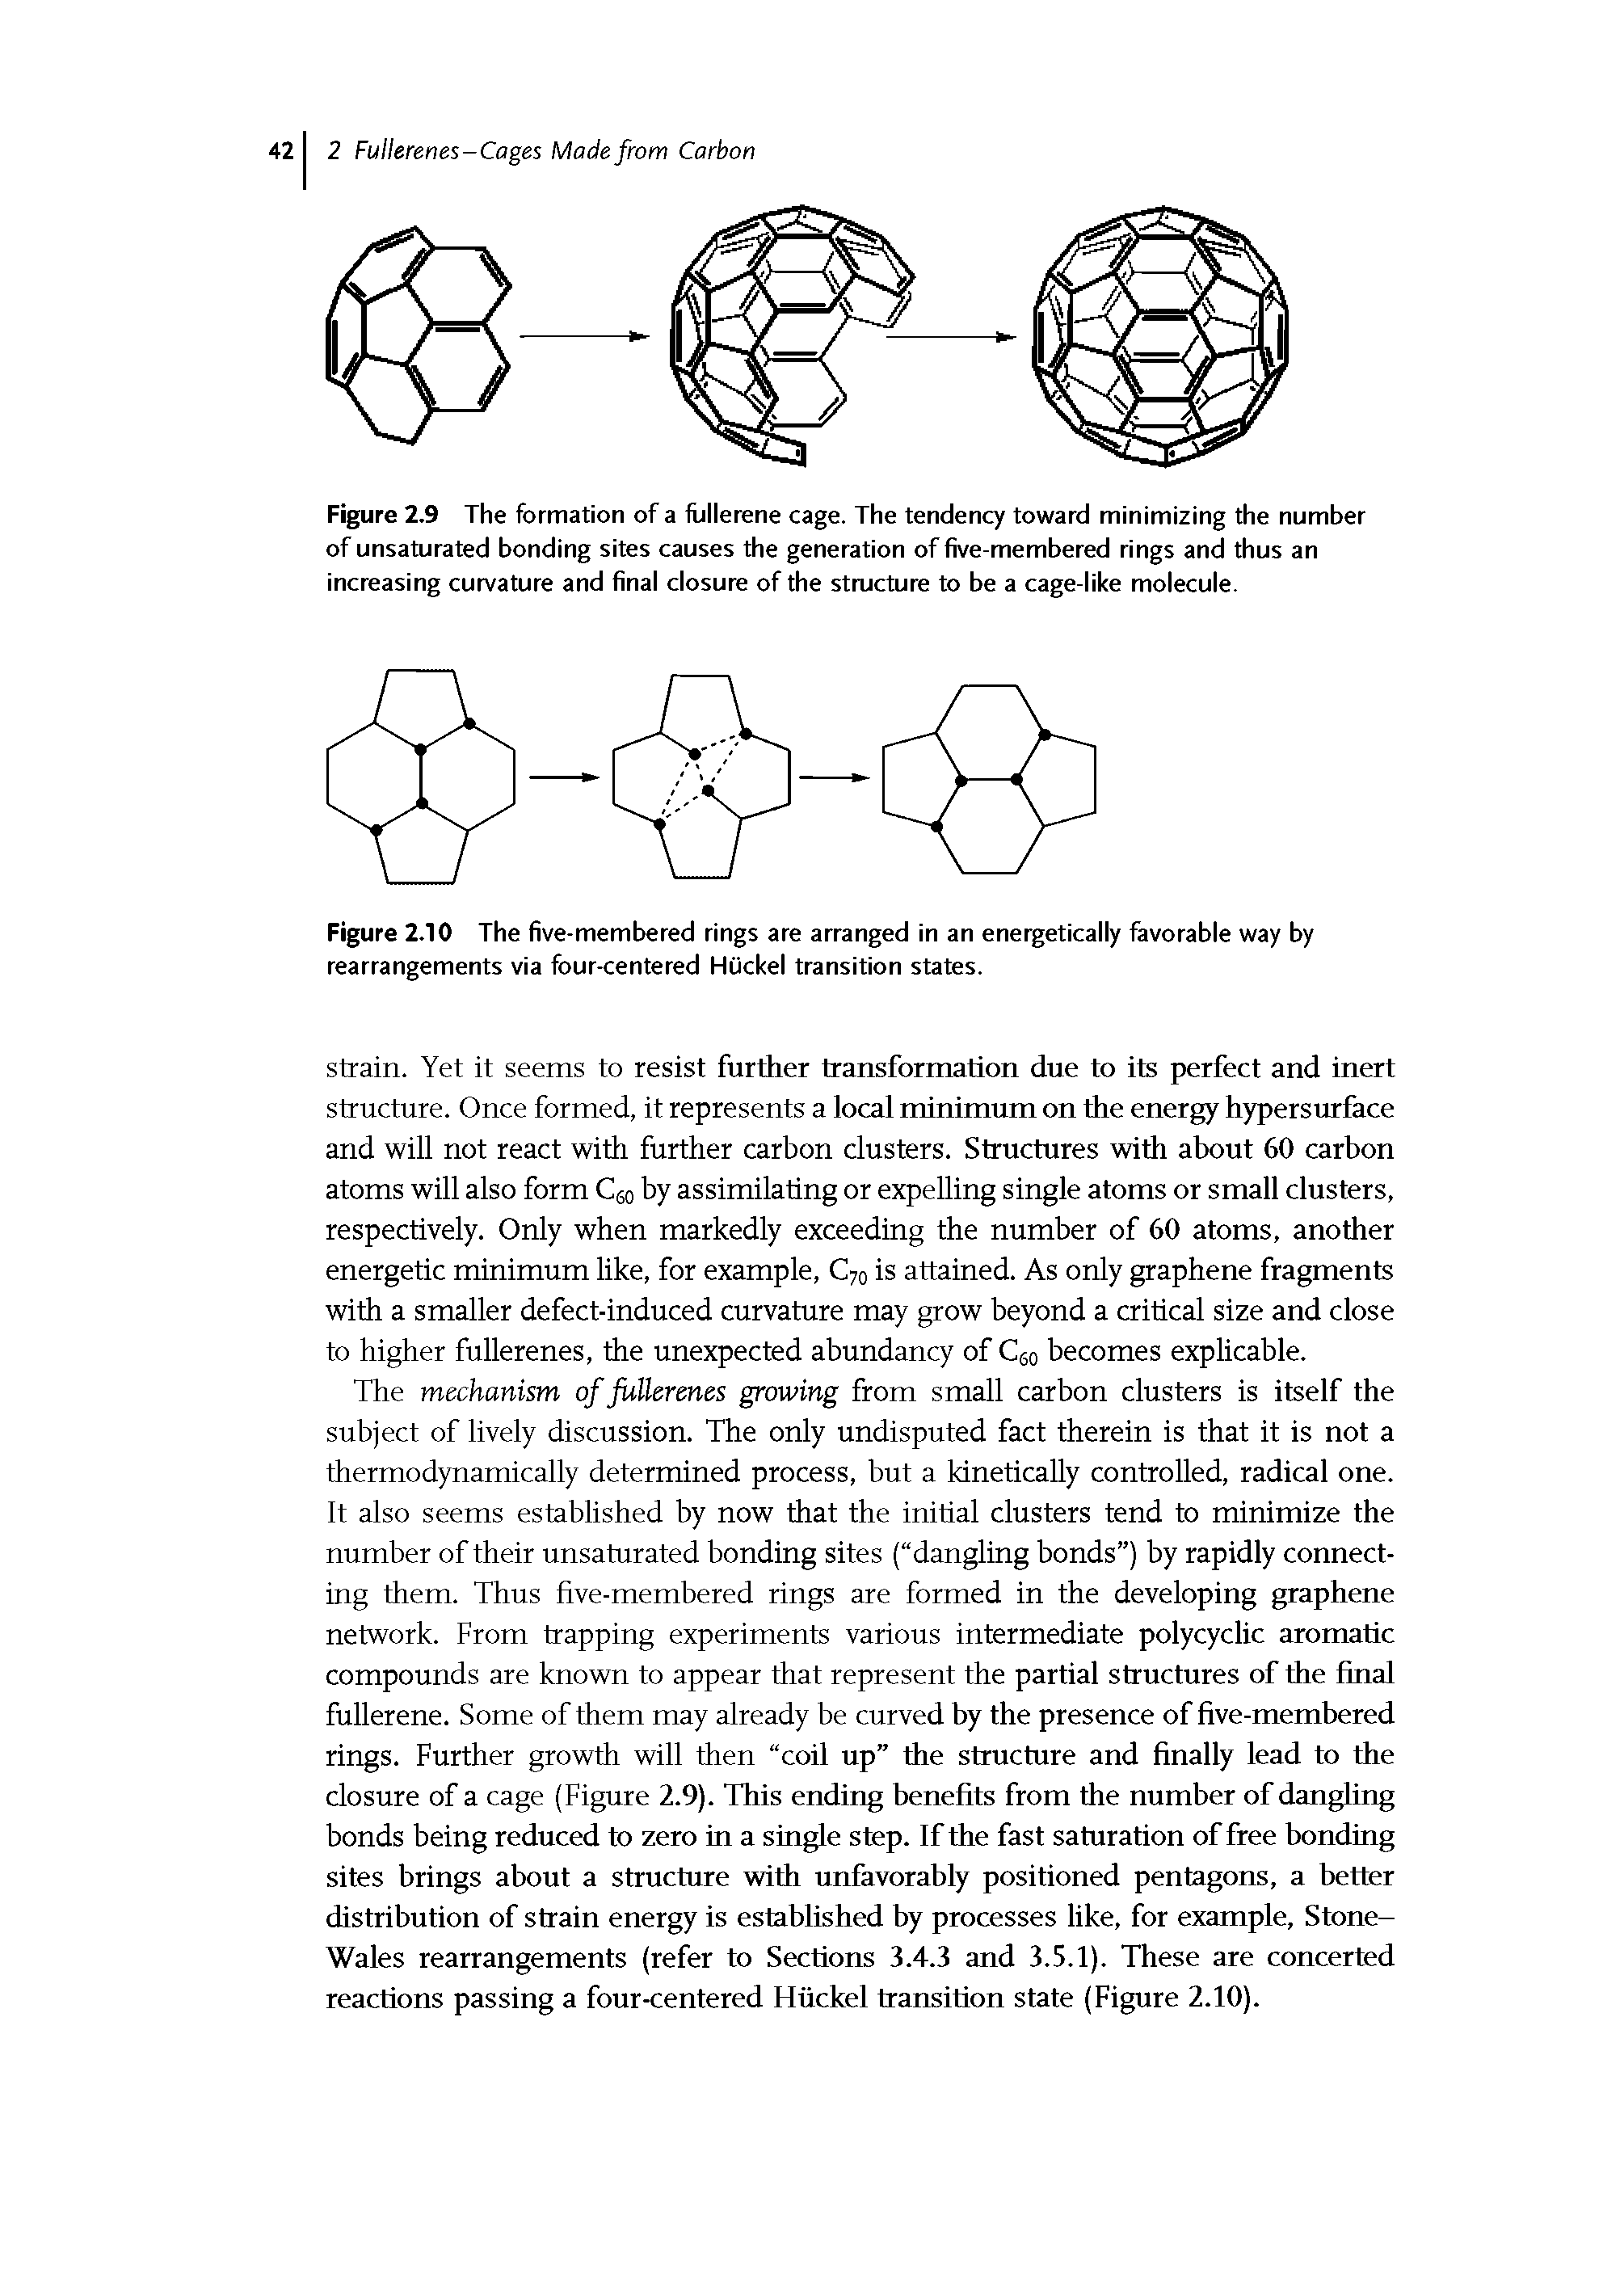 Figure 2.9 The formation of a flillerene cage. The tendency toward minimizing the number of unsaturated bonding sites causes the generation of five-membered rings and thus an increasing curvature and final closure of the stmcture to be a cage-like molecule.